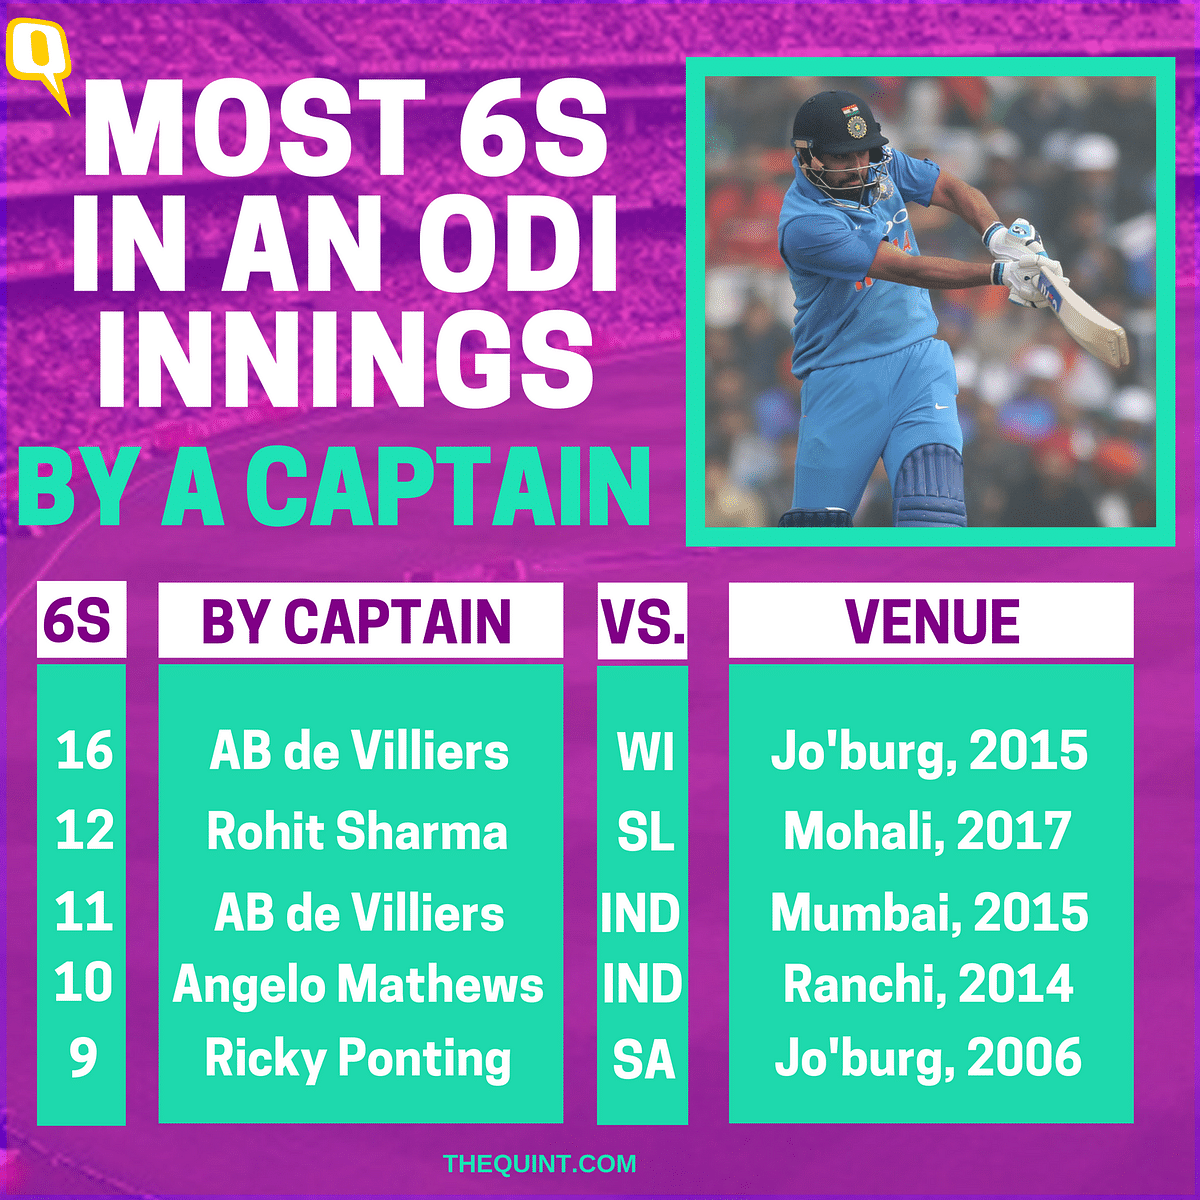 All the records created by Rohit Sharma in his record-breaking double century at Mohali.